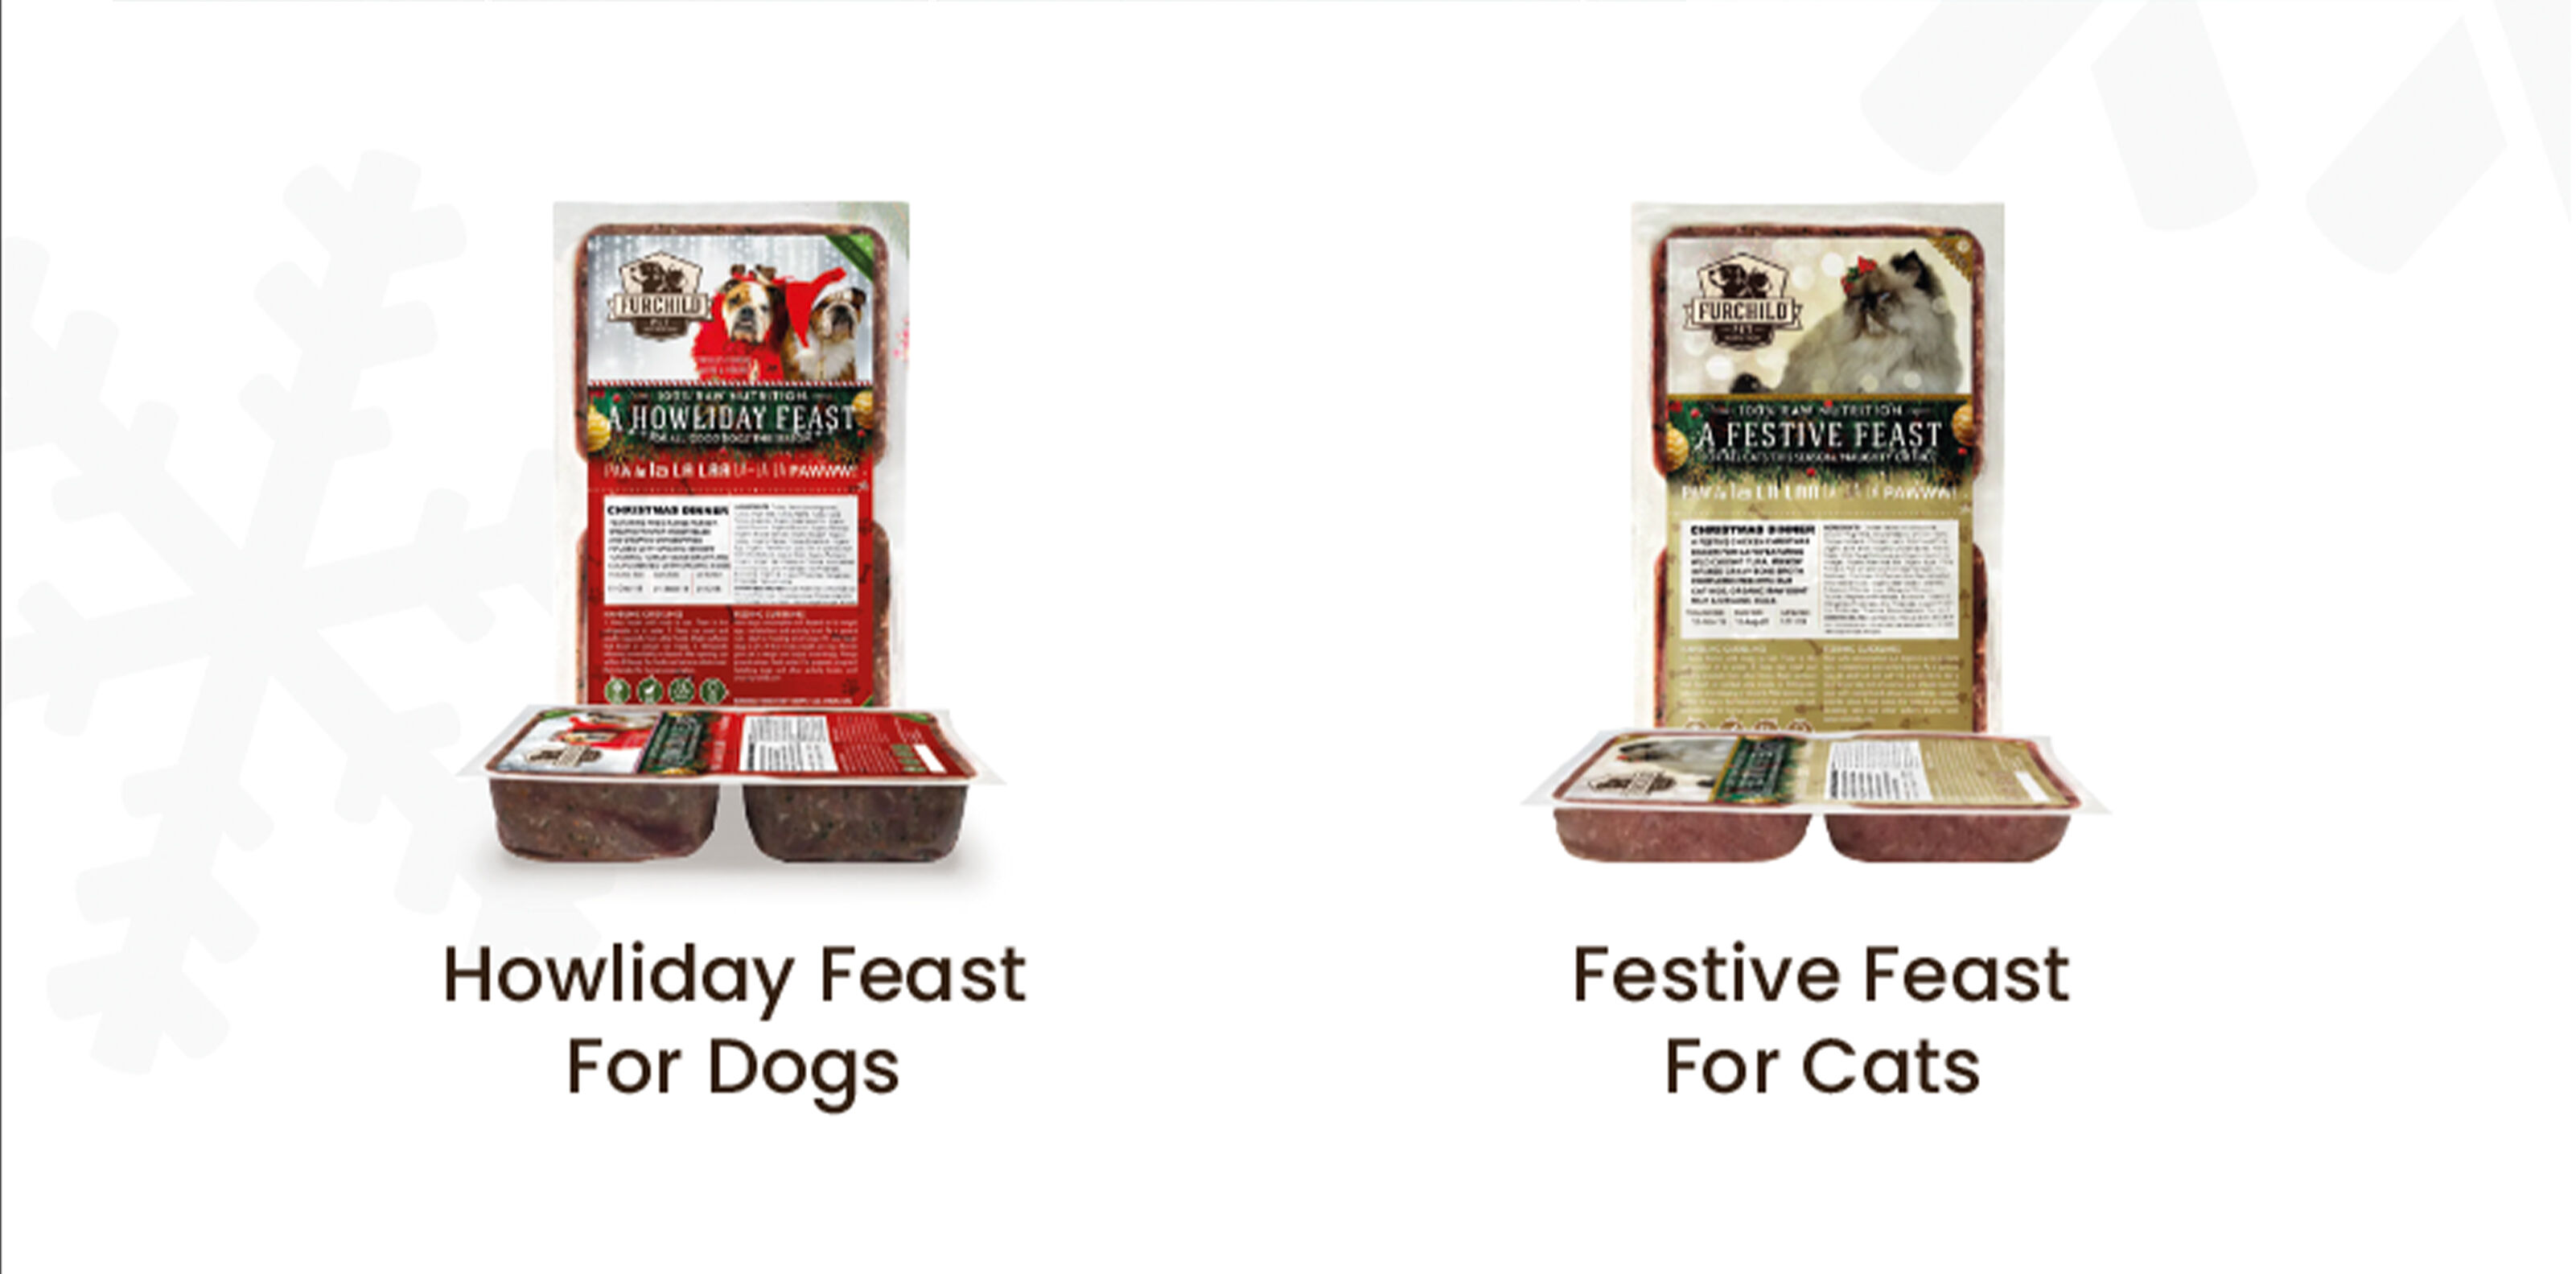 Howliday Feast for Dogs & Festive Feast for Cats